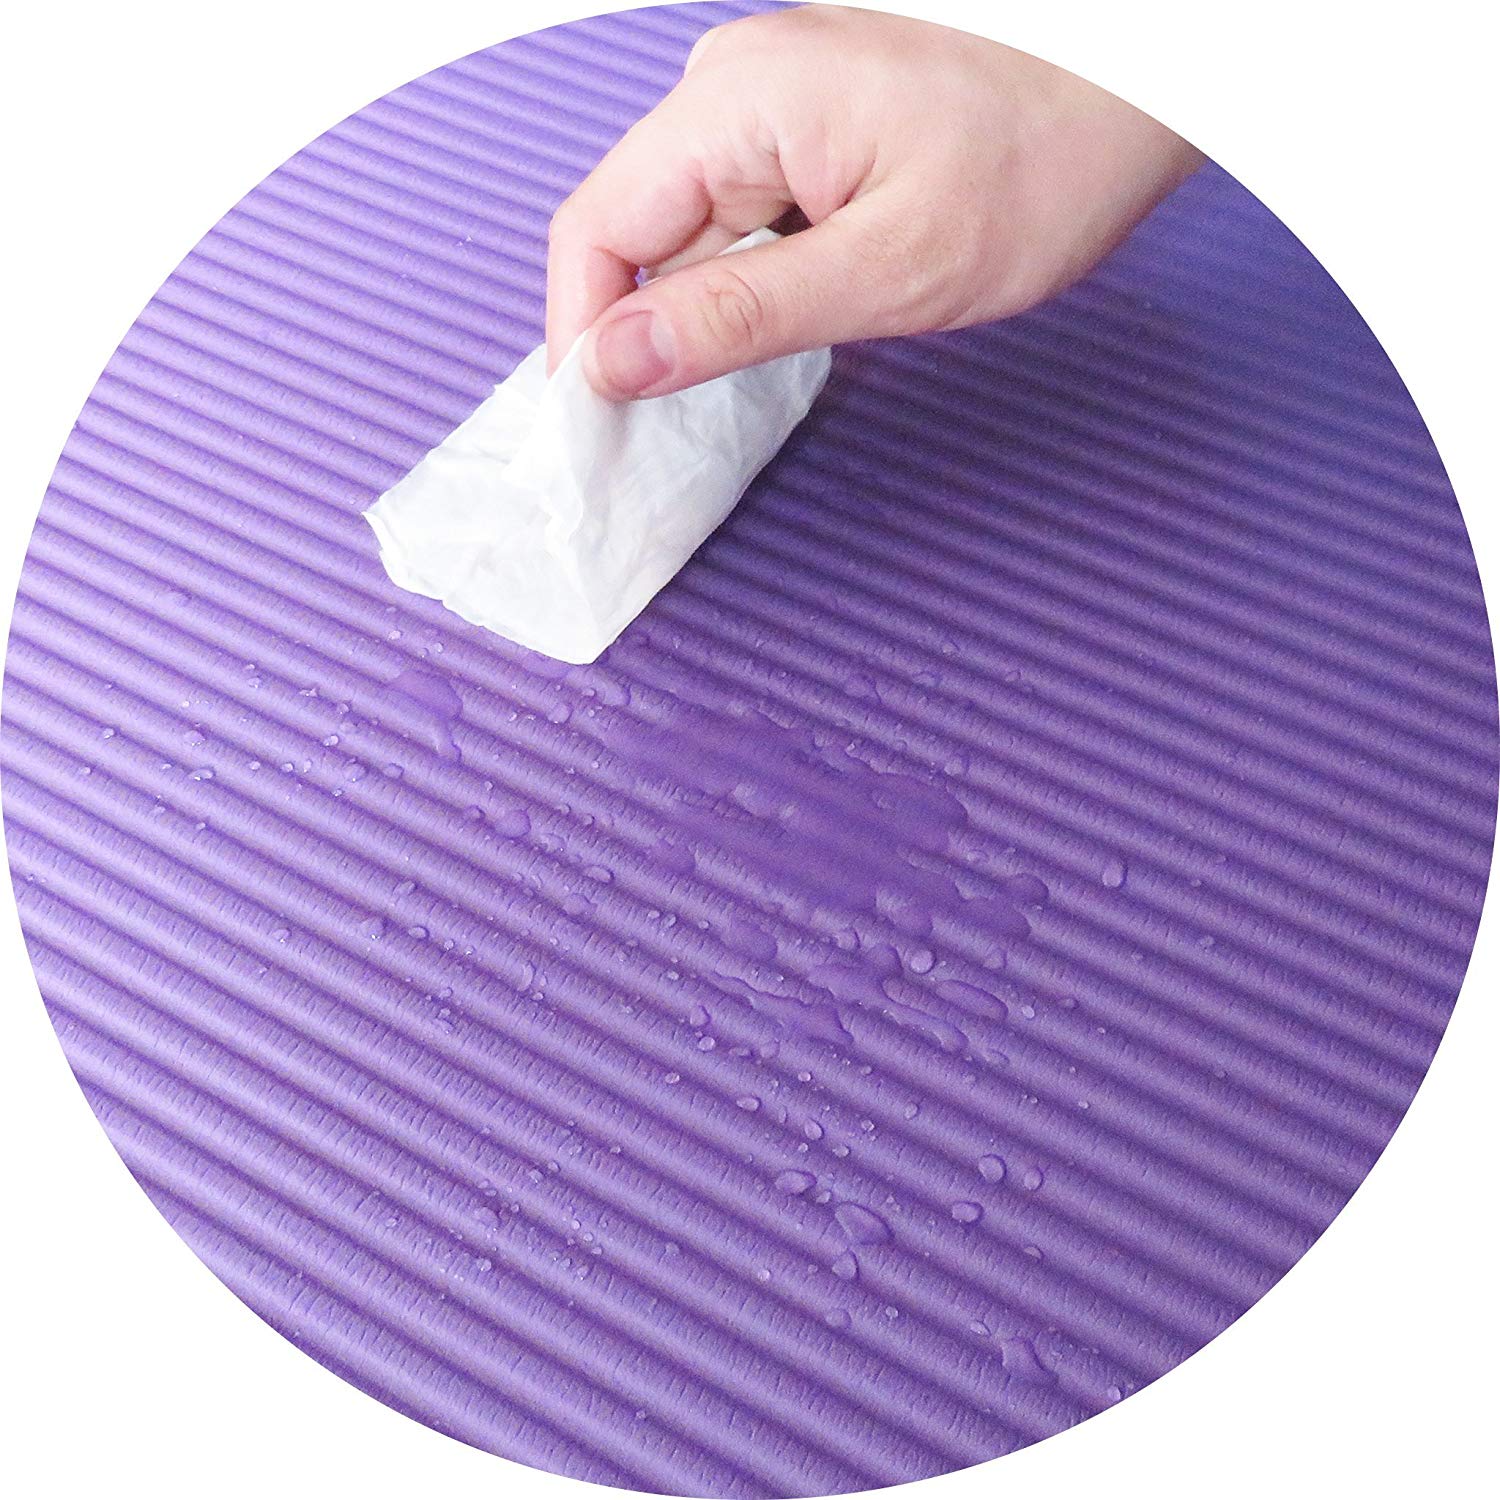 BalanceFrom All-Purpose 1/2 In. High Density Foam Exercise Yoga Mat Anti-Tear with Carrying Strap, Purple - image 4 of 5